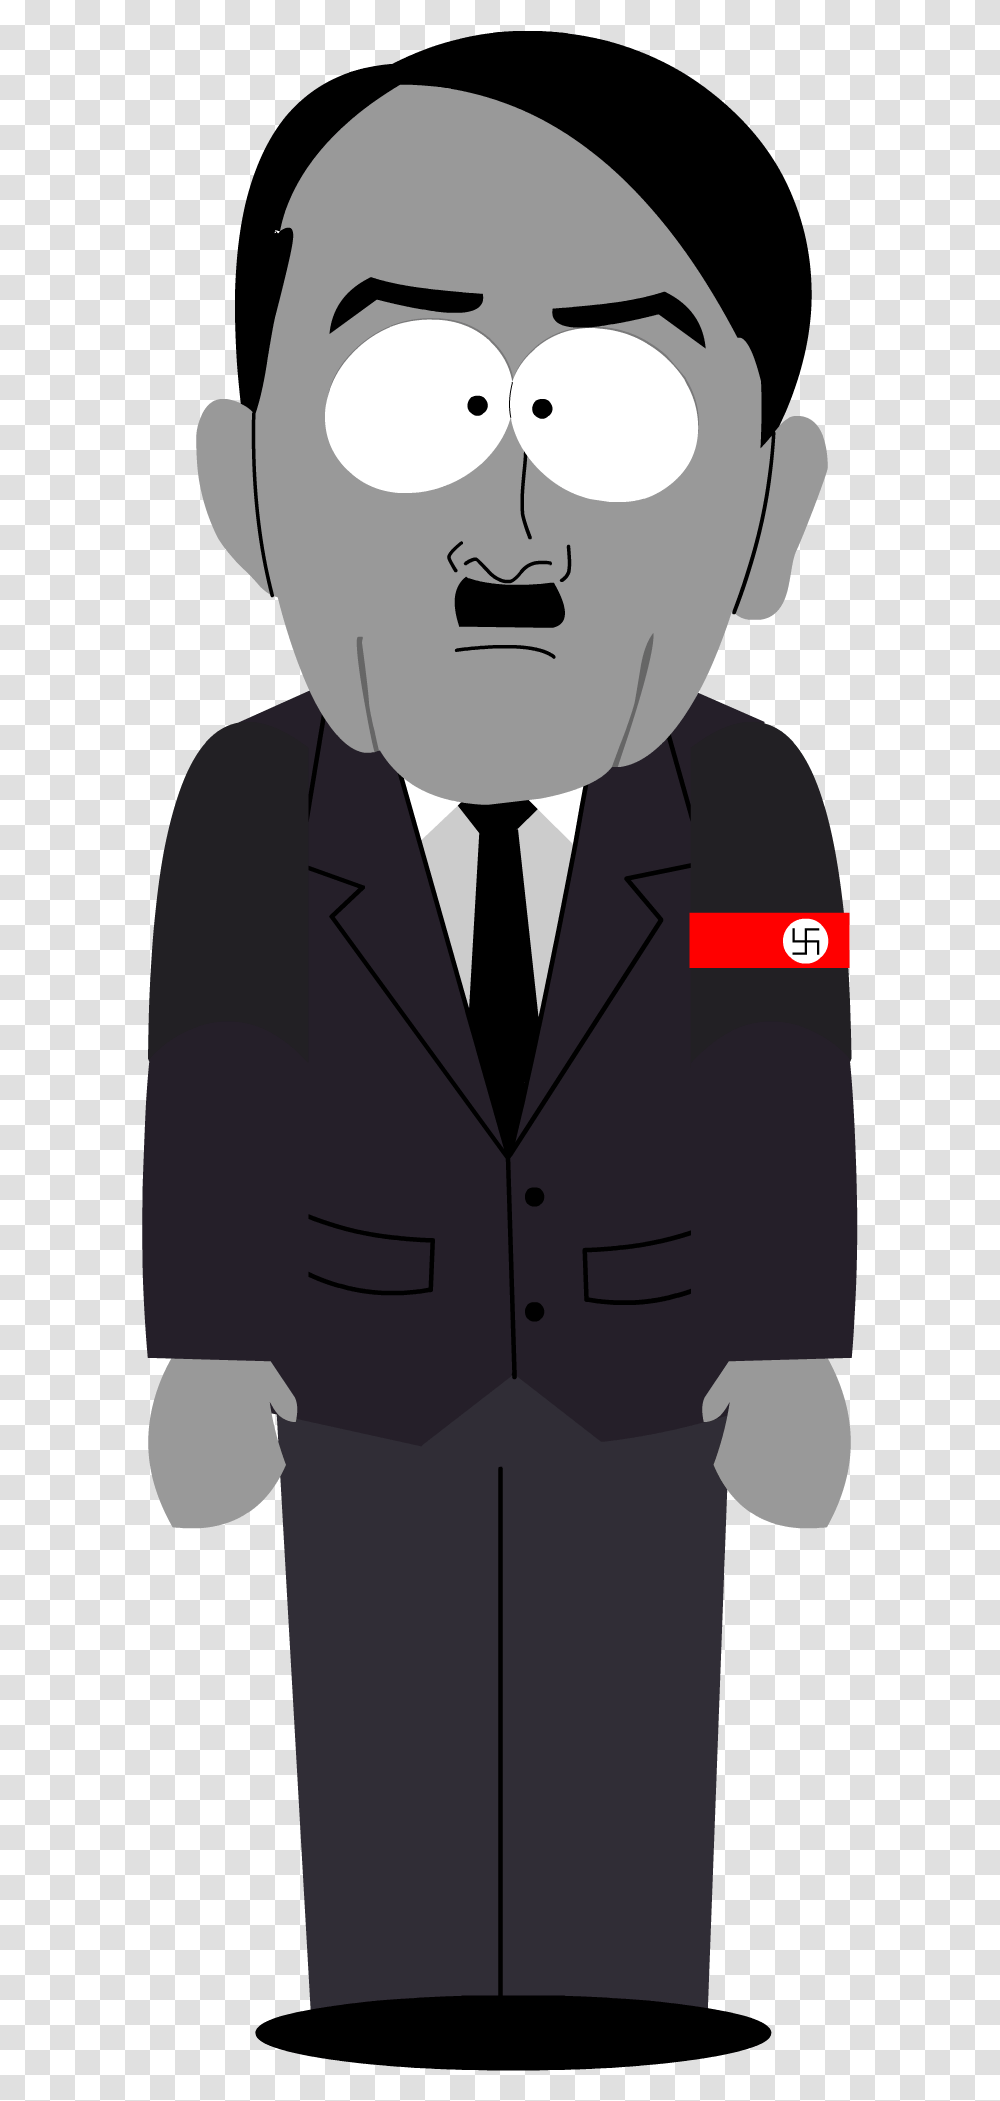 Hitler Image Background Hitler Picture With No Background, Apparel, Suit, Overcoat Transparent Png